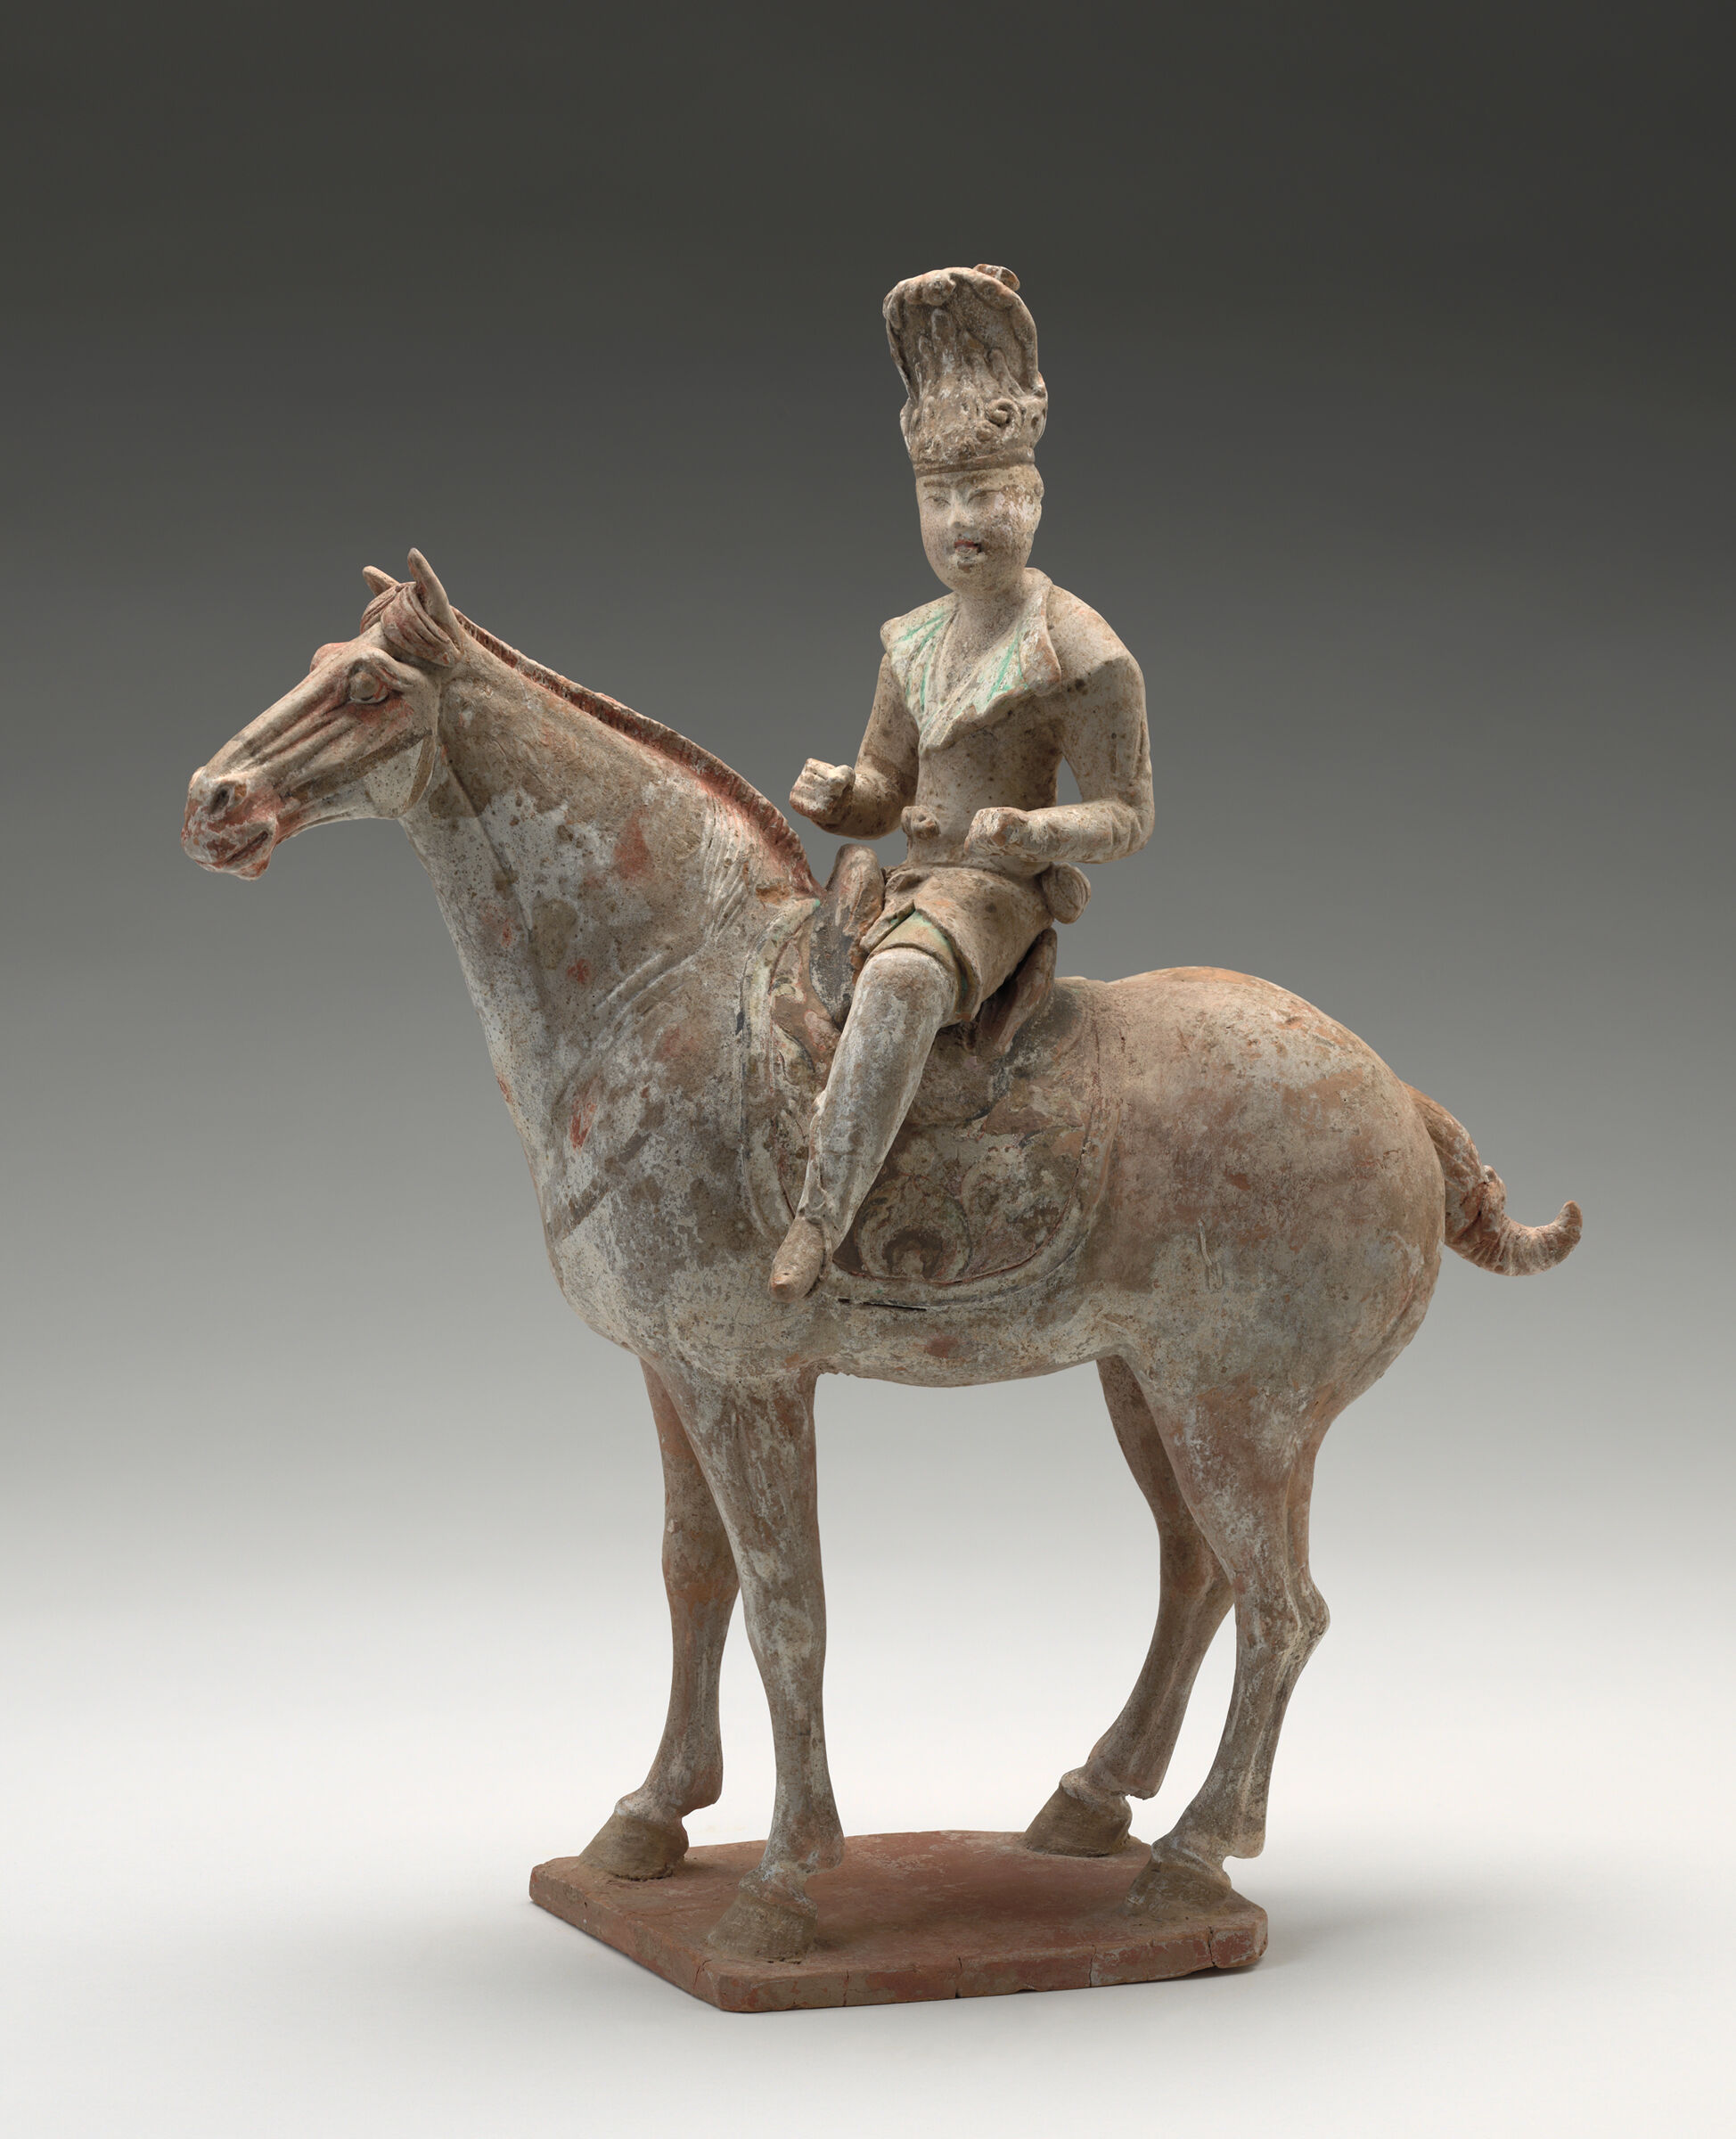 Equestrian Male, From The Tomb Sculpture Set: Two Equestrian Figures, One Male With A Tall, Elaborately Embellished Hat, One Female With Hair In A Topknot, Both With Pointed Boots, And Hands Positioned To Hold The Reins Of Their Standing, Saddled Horses